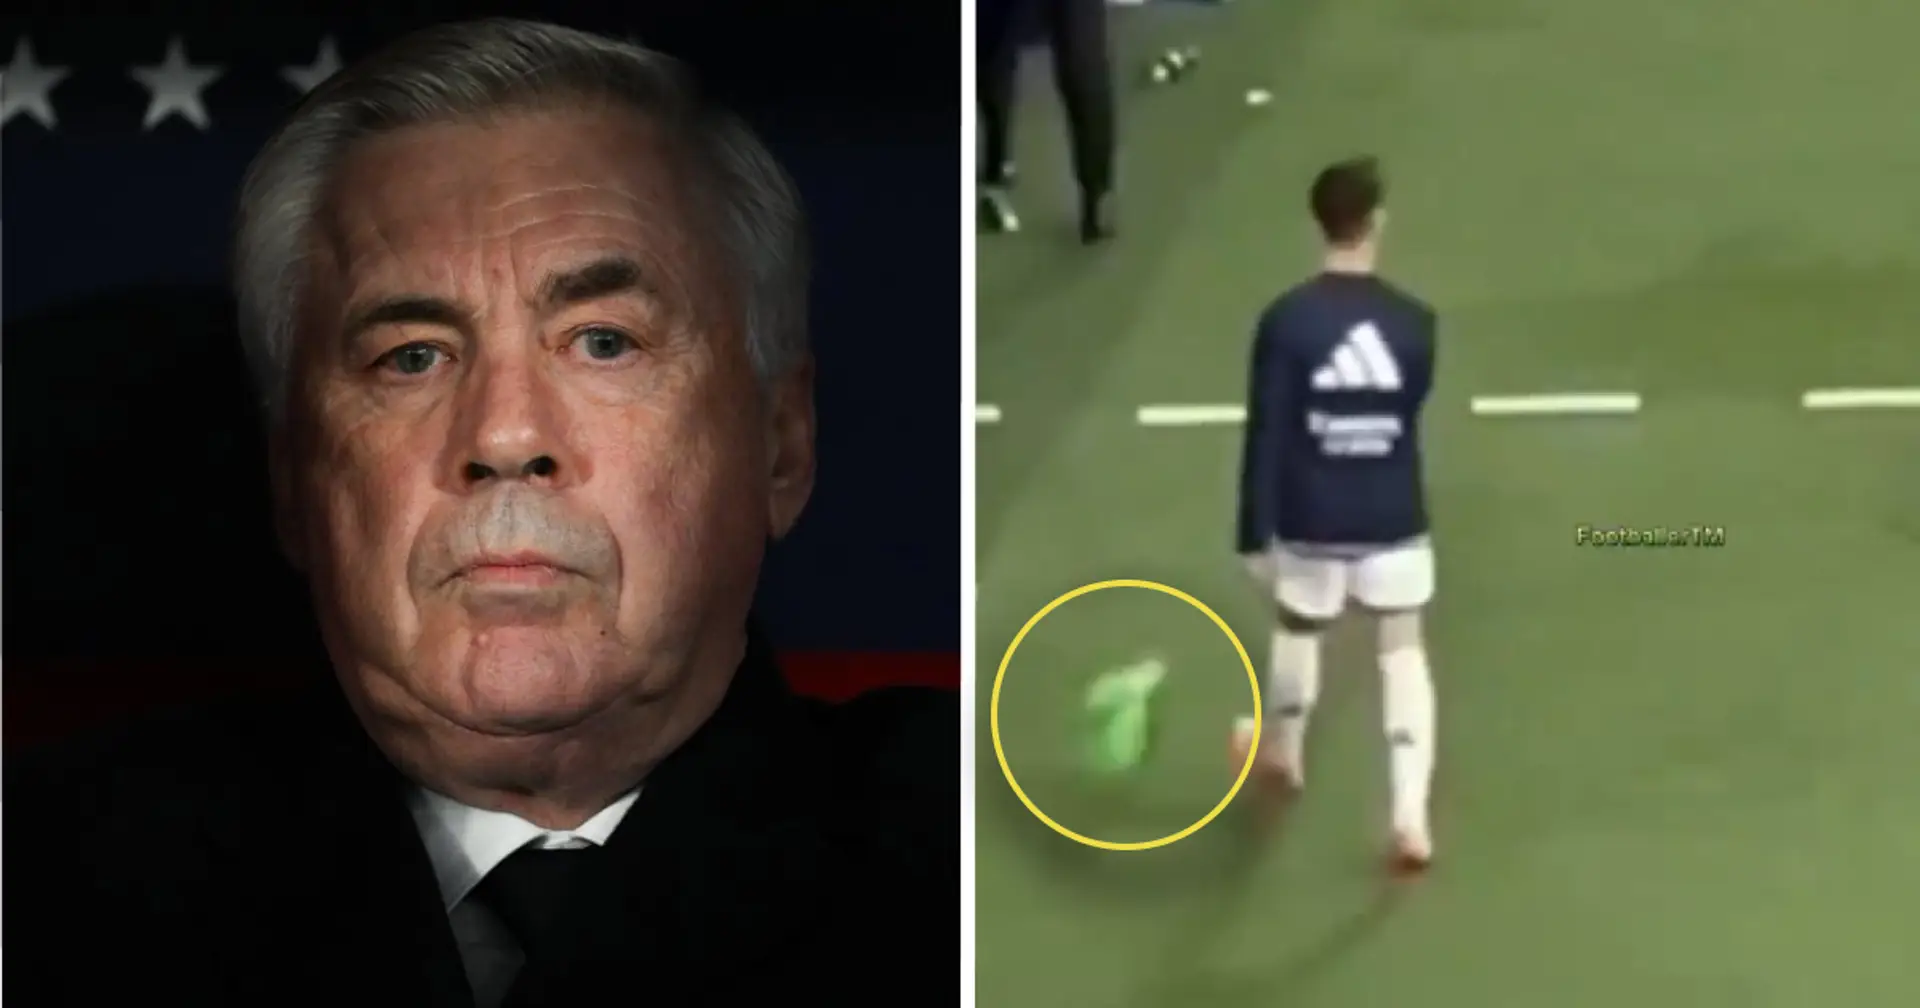 Caught on camera: Arda Guler gets angry at Ancelotti, throws shirt and storms tunnel